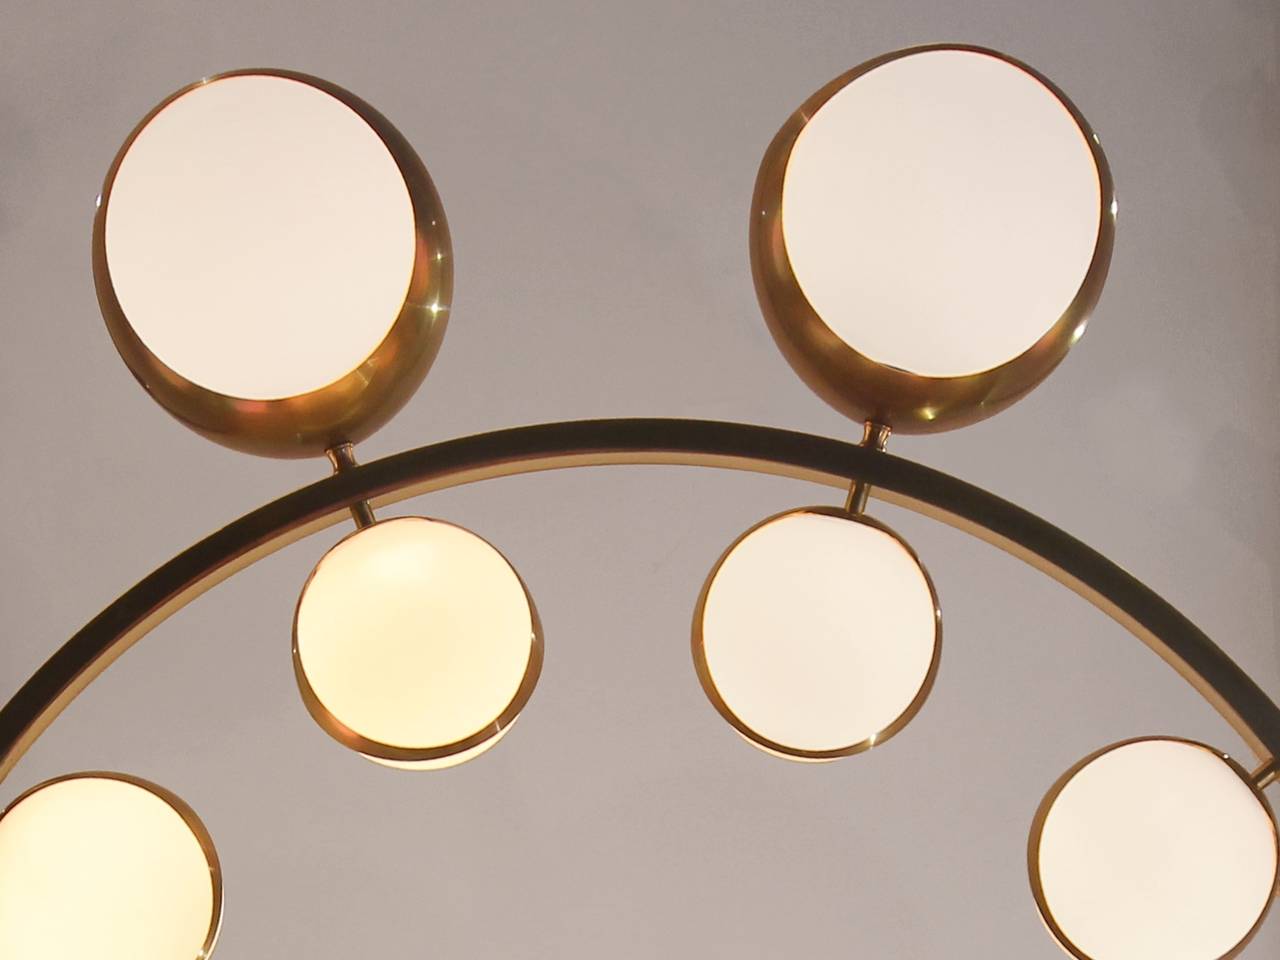 Large round chandelier in the taste of Stilnovo, Italy, circa 1960-1970, brass circle and mounting, the interior side of the circle enhanced by a series of ten illuminated white opal glass spheres and the outside of the circle with a series of ten